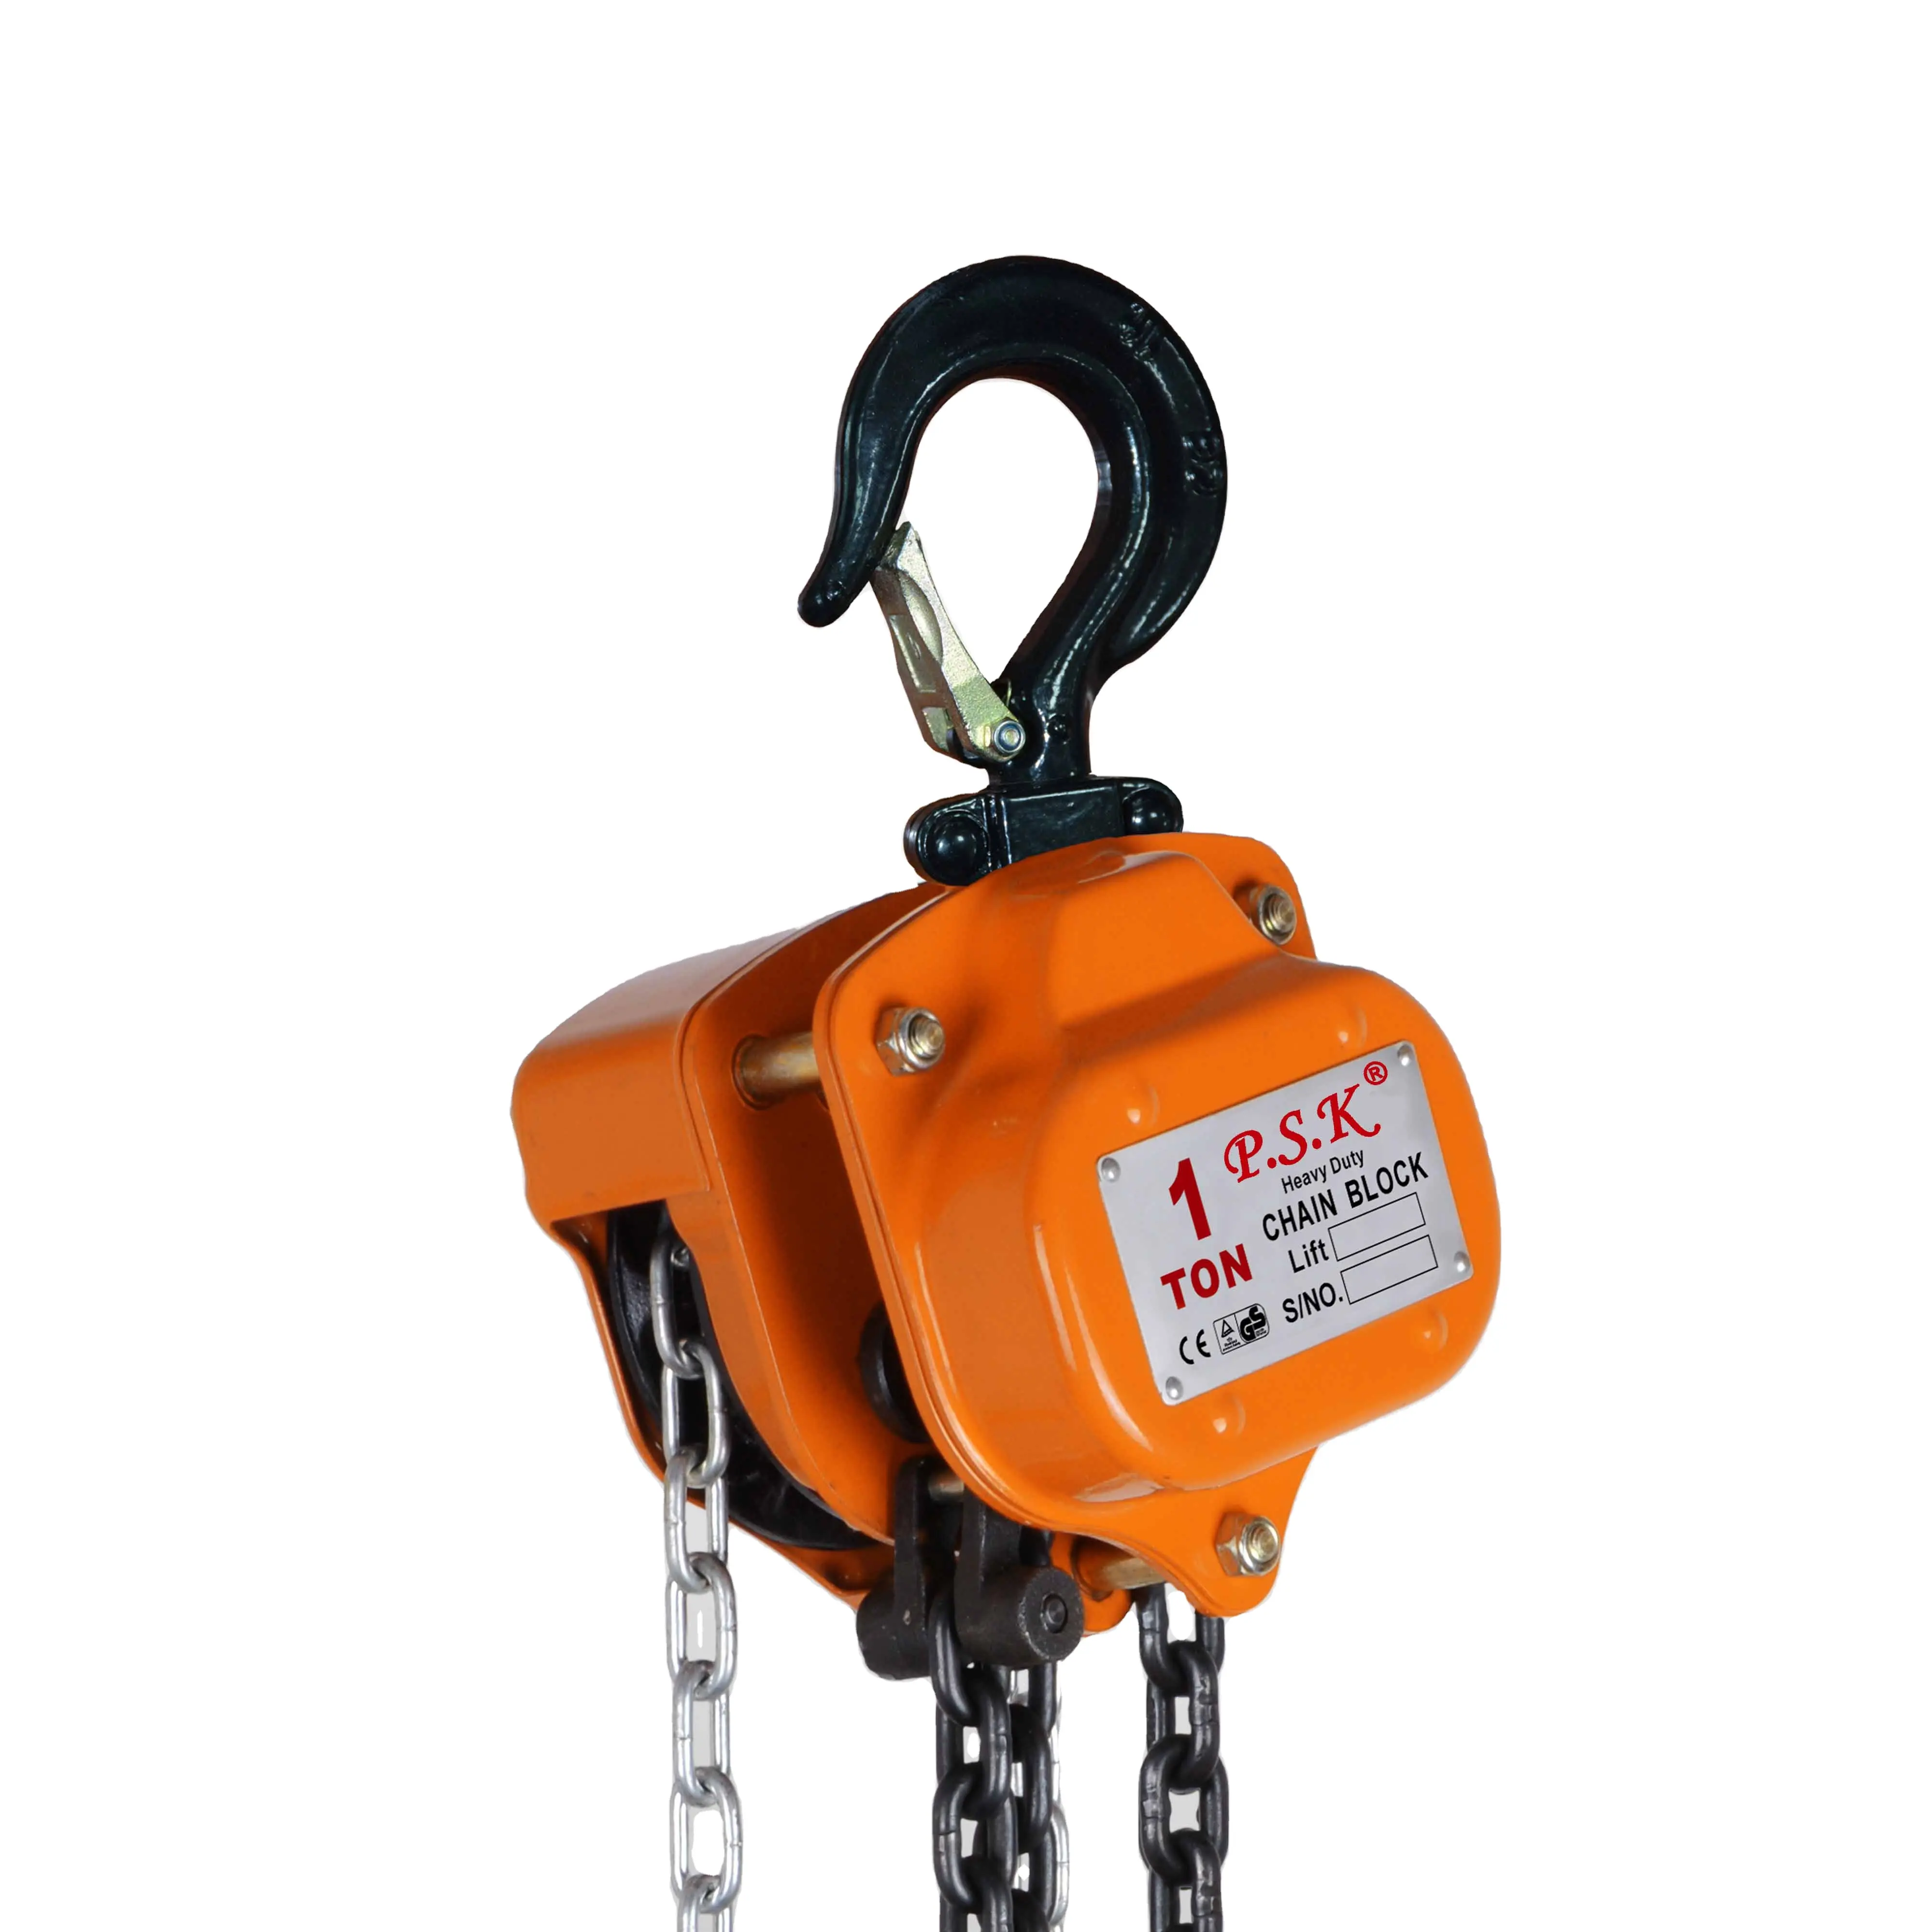 VC type Manual Hand Lift 1 ton manual chain block Industrial Grade Structures hand operated chain hoist